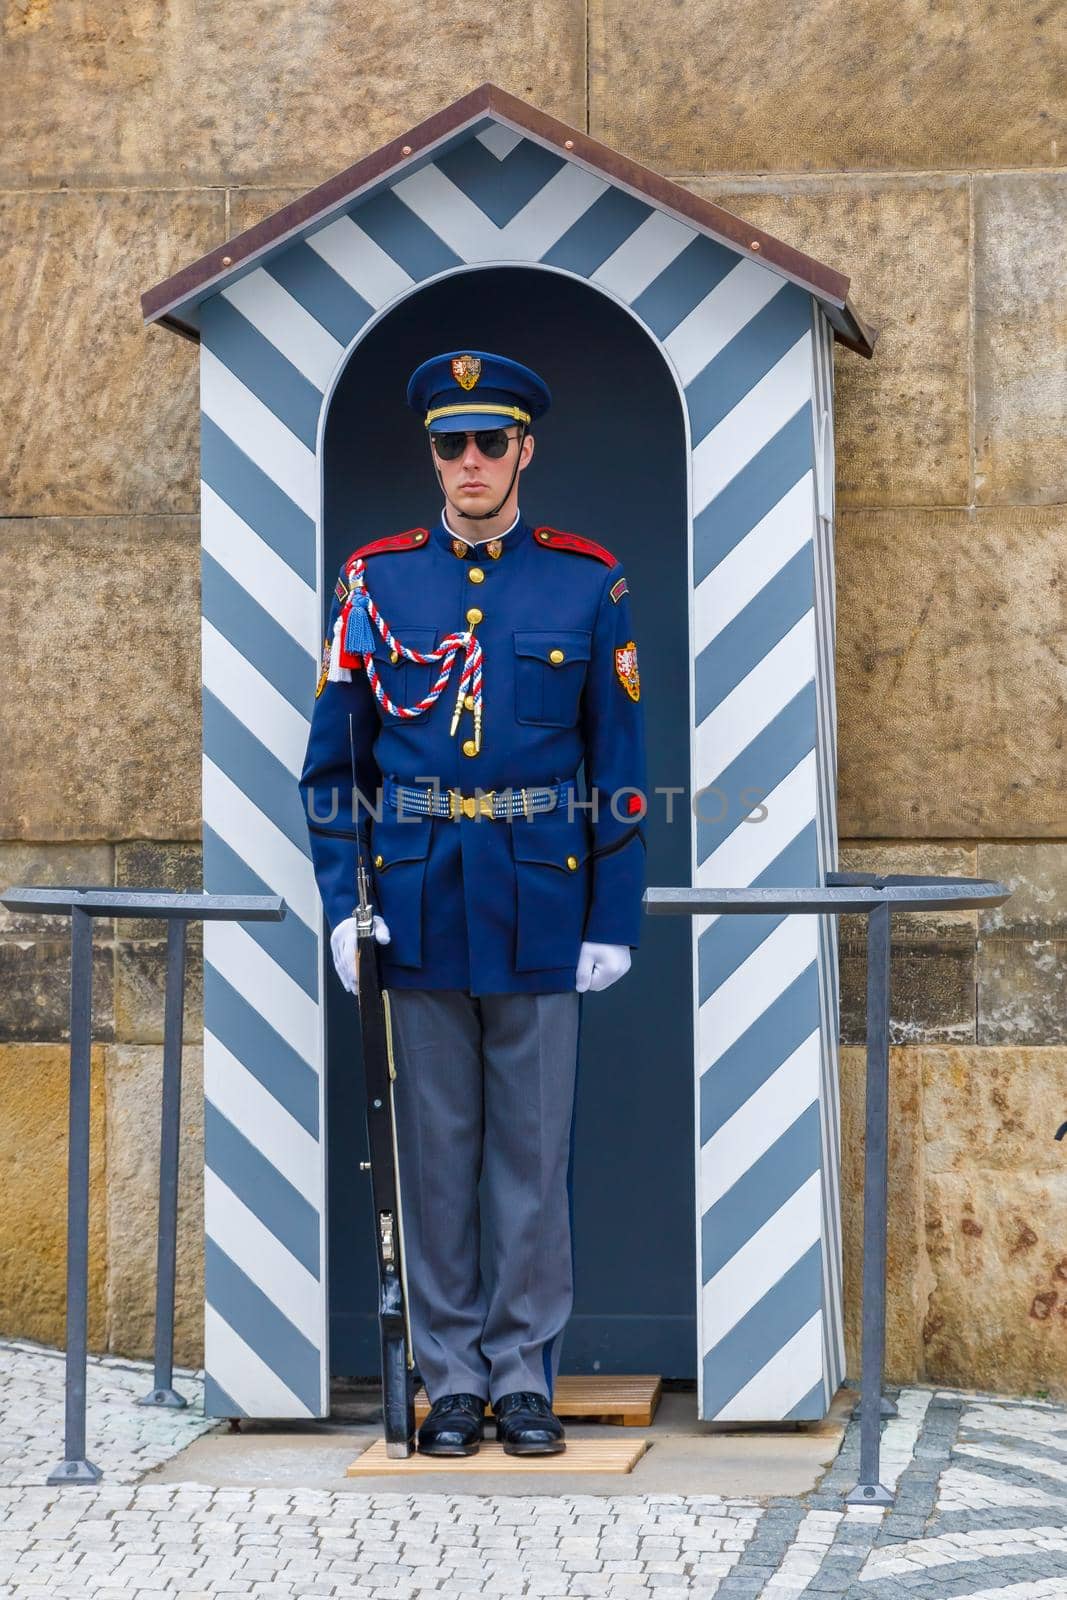 Changing of the guard at the post of honor in the Czech Republic. Suitable for men in military uniform by Yurich32